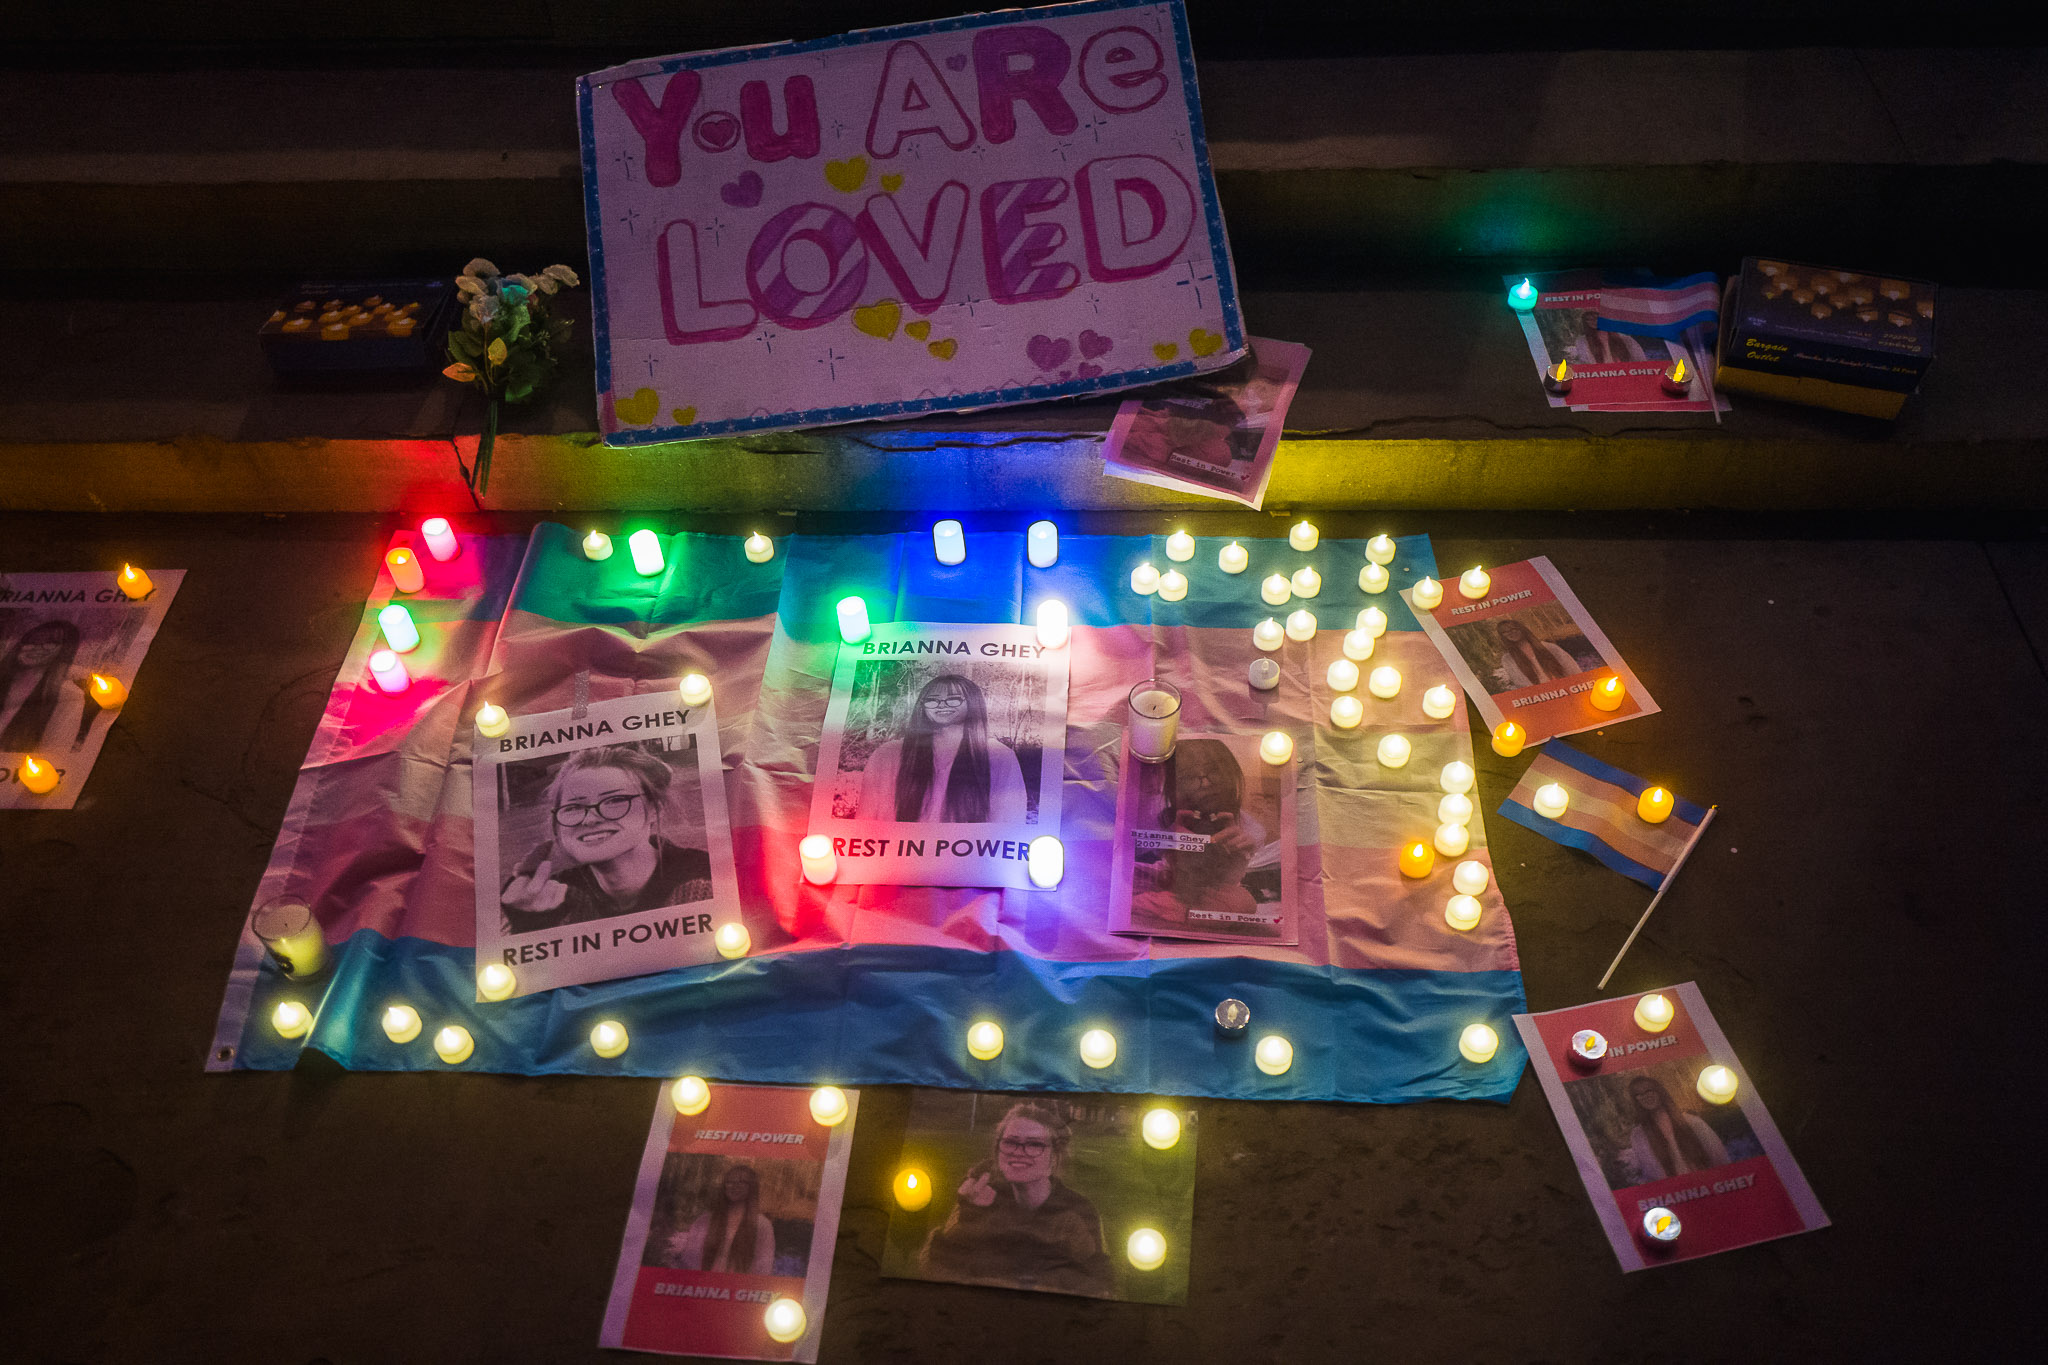 On the steps of St George's Hall lies a trans flag covered in messages of love and candles for Brianna Ghey.